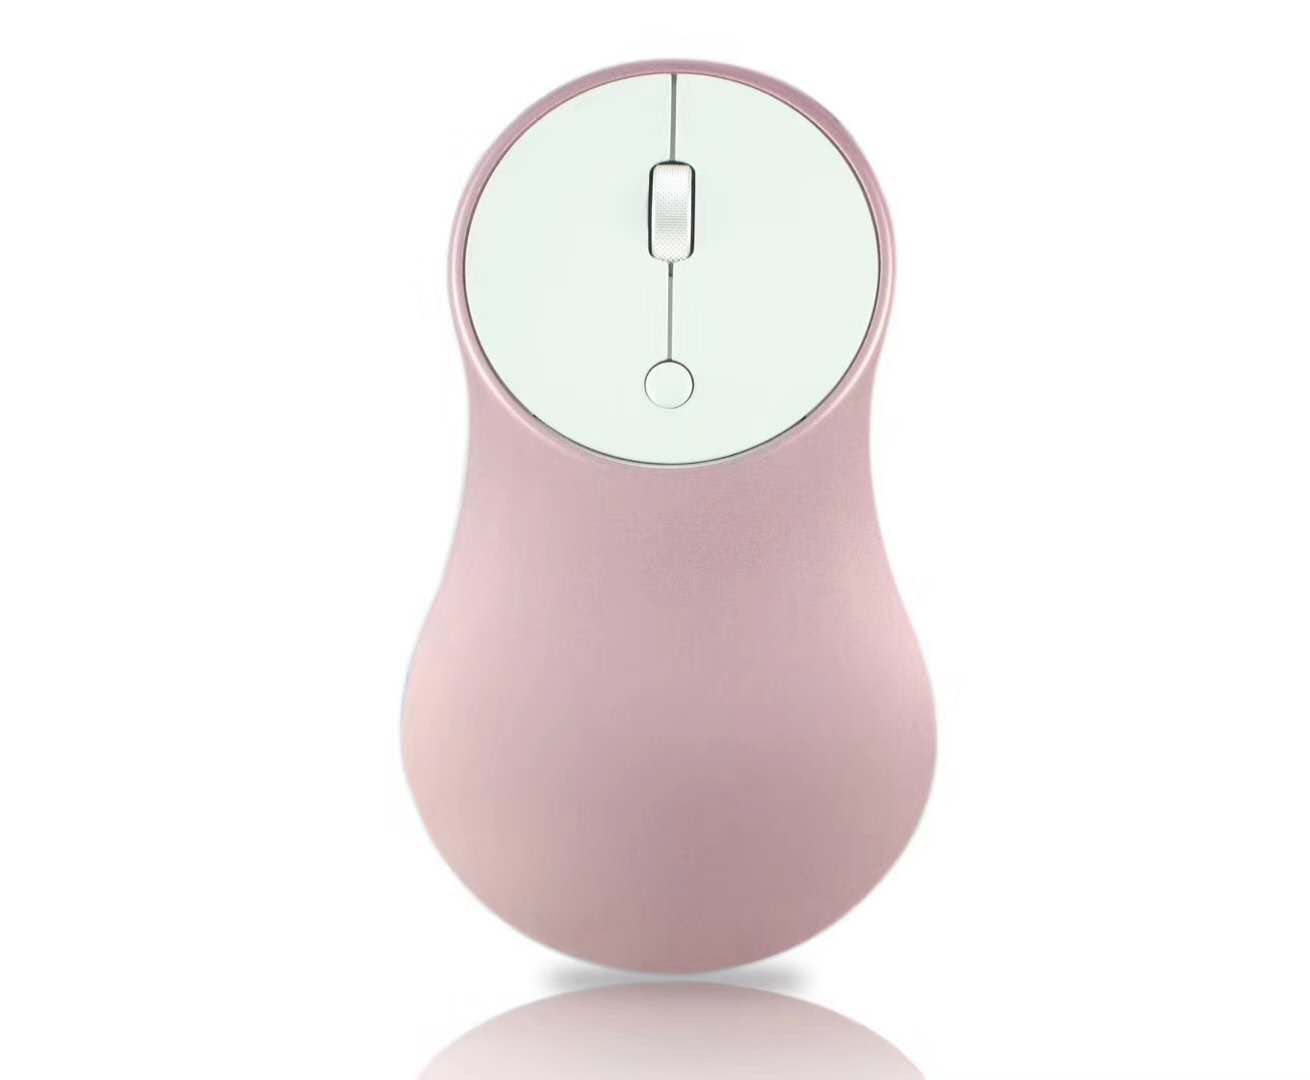 Rechargeable 2.4G Wireless Mouse,Aluminum Material Frame,Various Color Optional